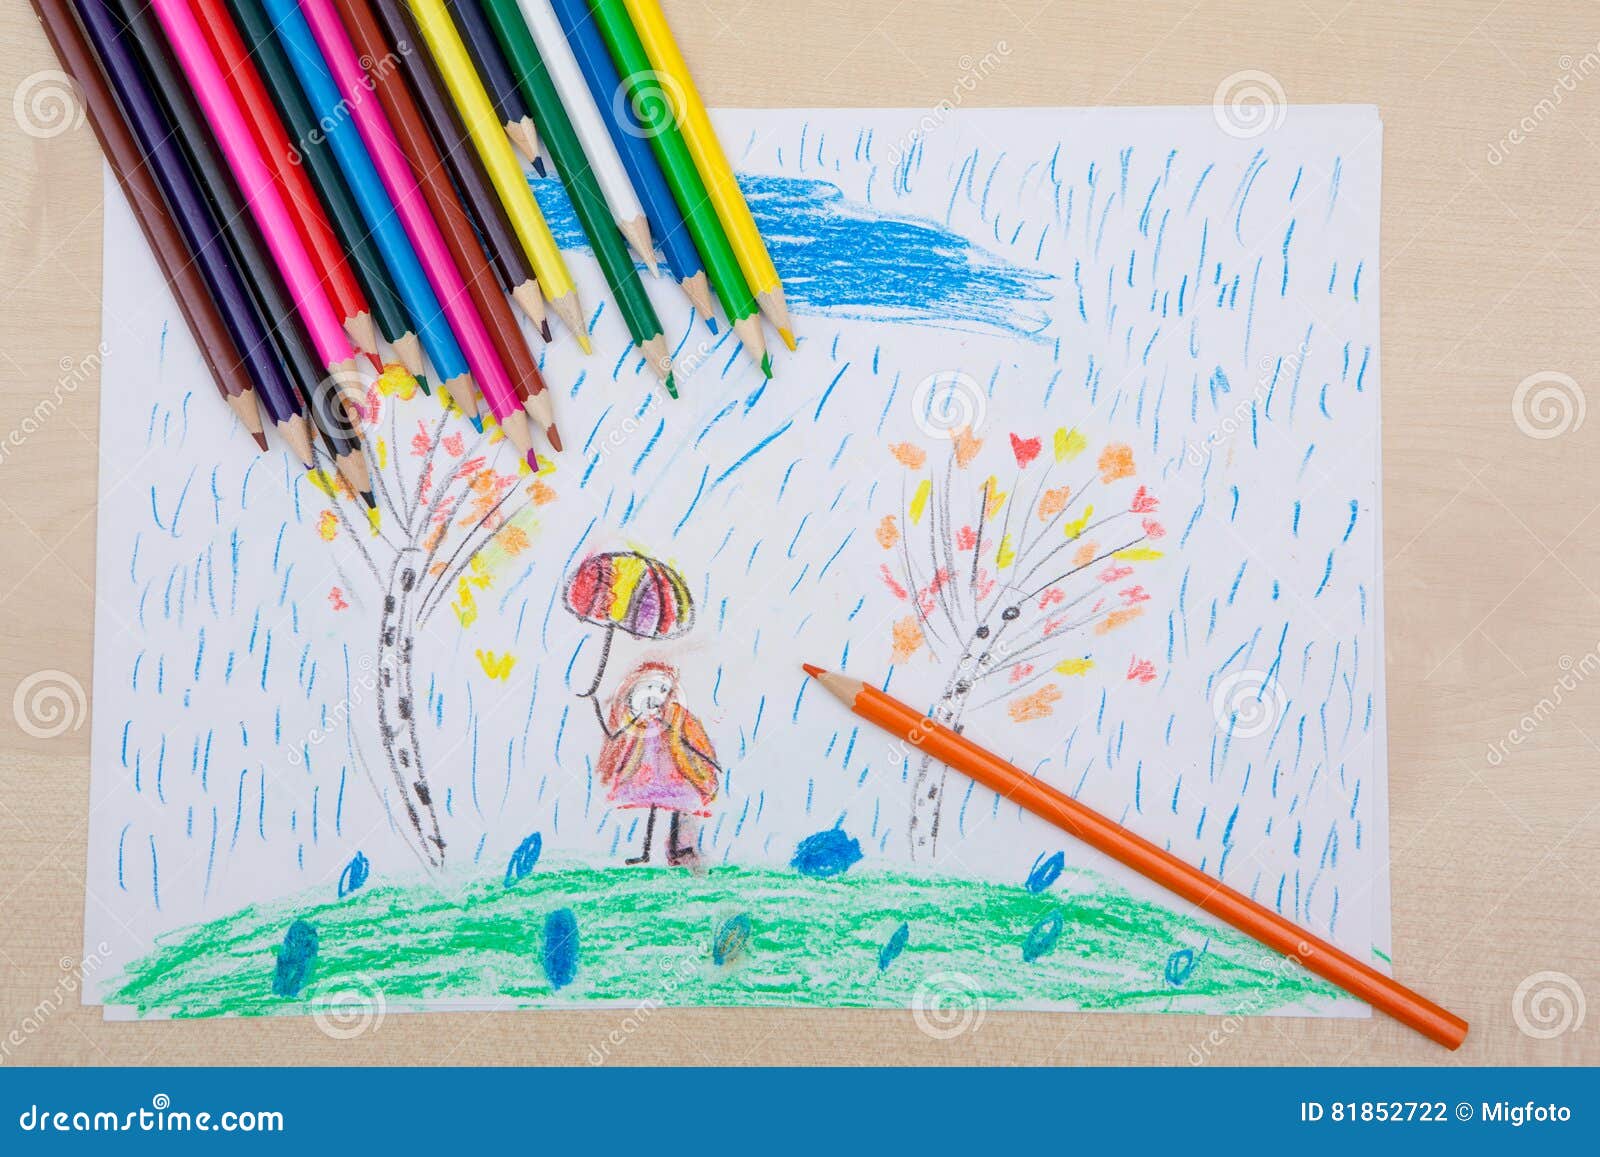 Children`s Drawing Pencils. Stock Photo - Image of graphic, little: 81852722